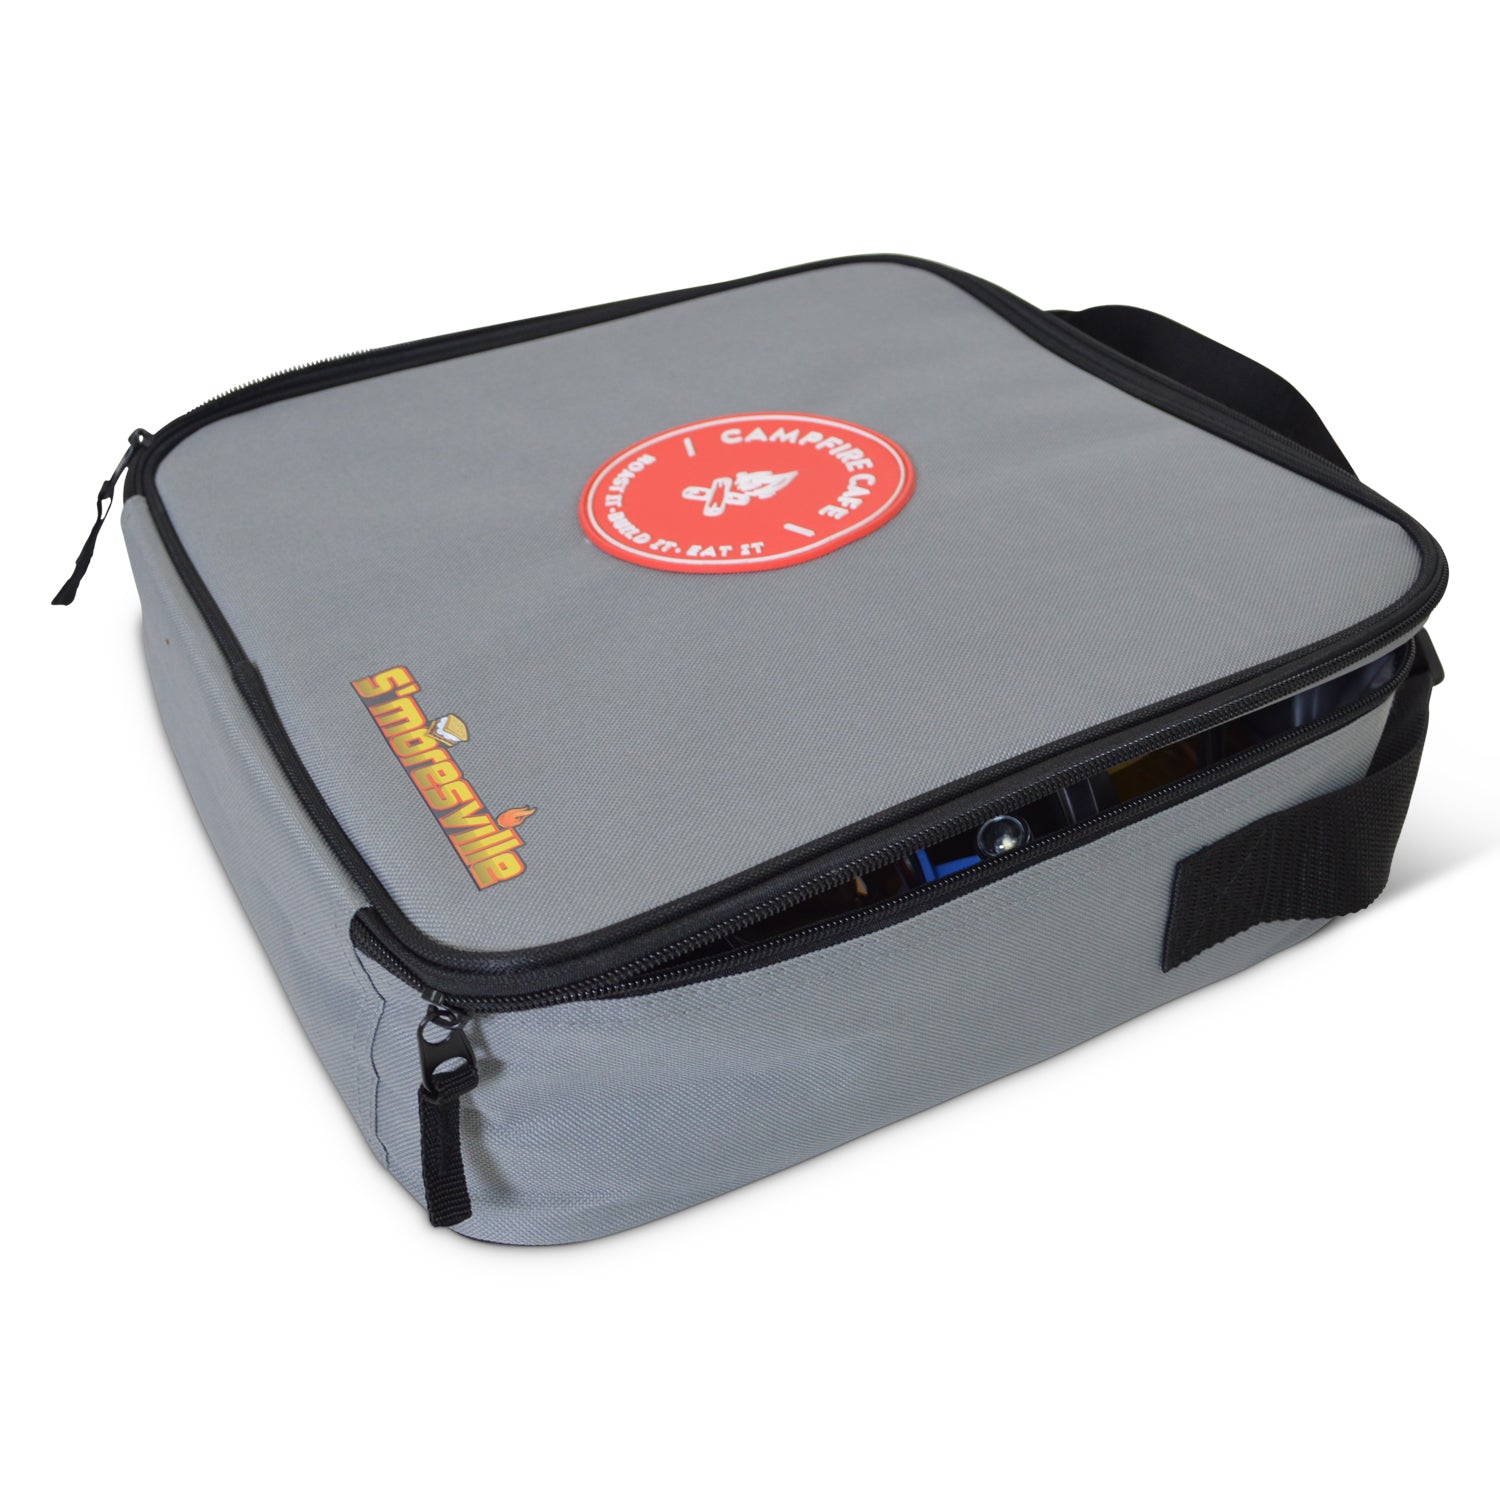 The ultimate Carry Cooler to ensure all of your S&